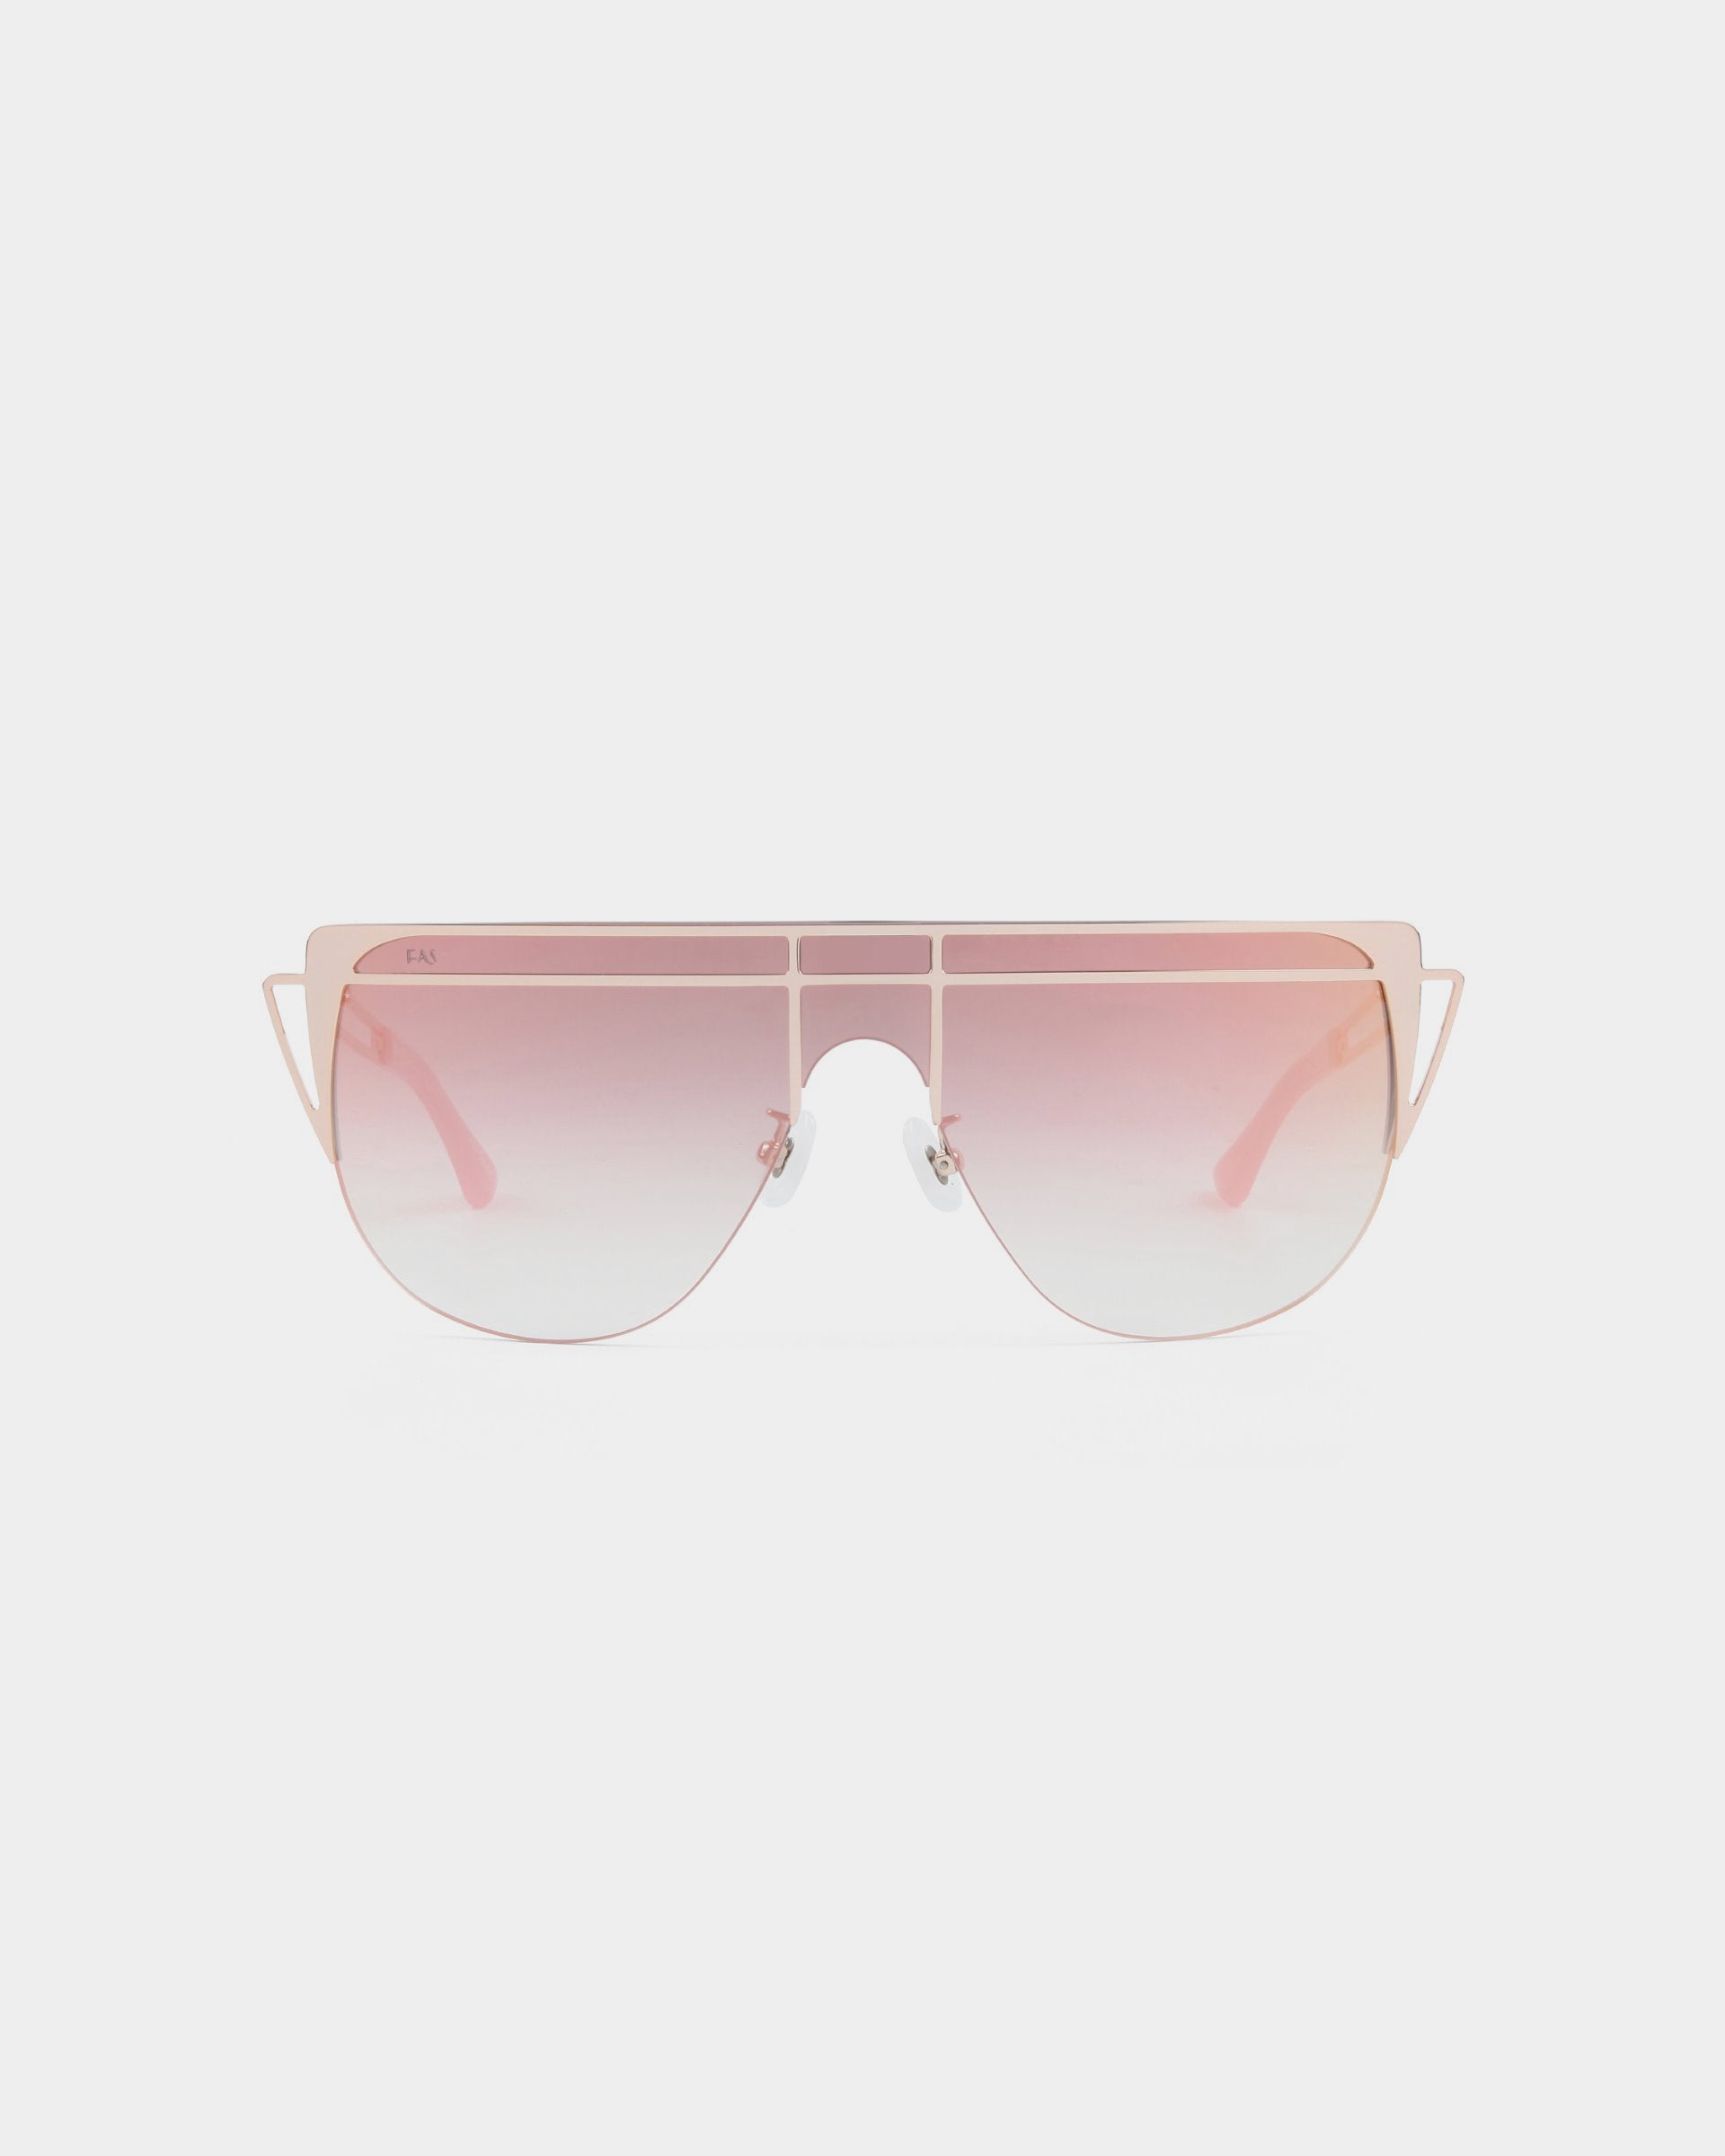 A pair of stylish, oversized avant-garde Alien sunglasses by For Art&#39;s Sake® with a thin handmade gold-plated stainless steel frame. The lenses are gradient pink, transitioning from light to dark. The frame features a double bridge and angular temple tips, adding a modern, geometric touch to the design. 100% UV protection is ensured.